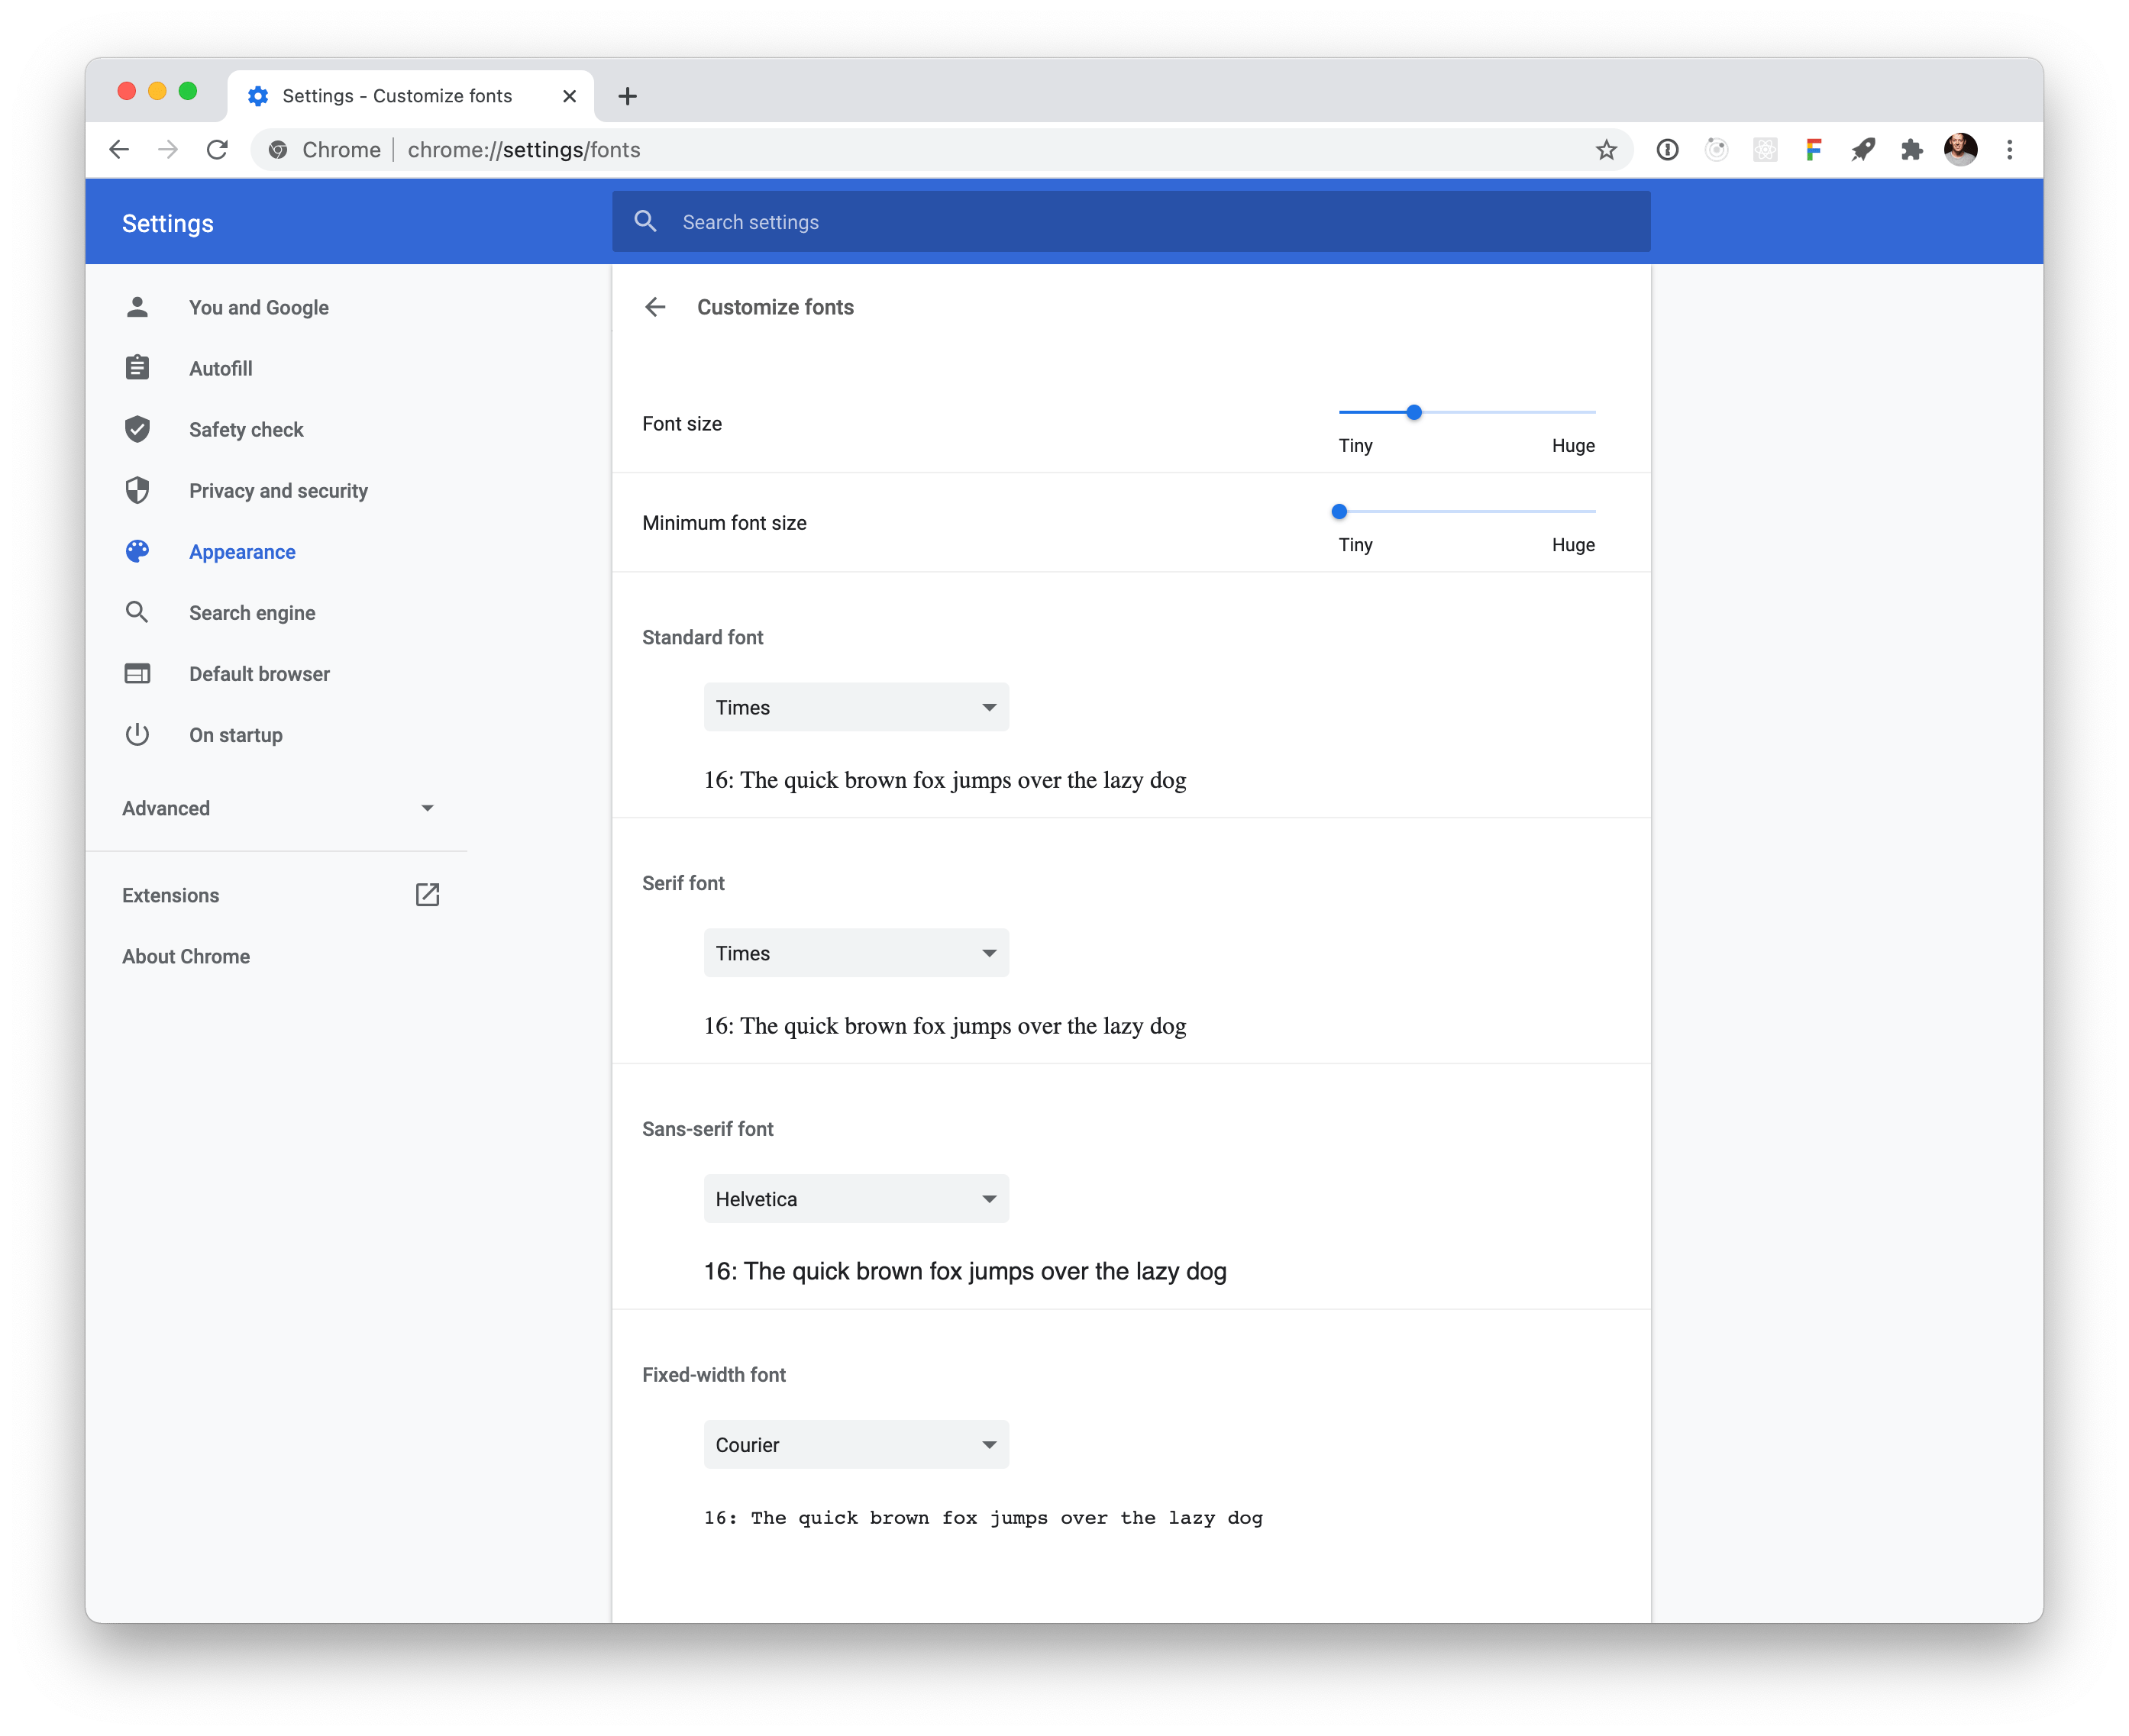 Screenshot of the “Customize Fonts” setting in Google Chrome.